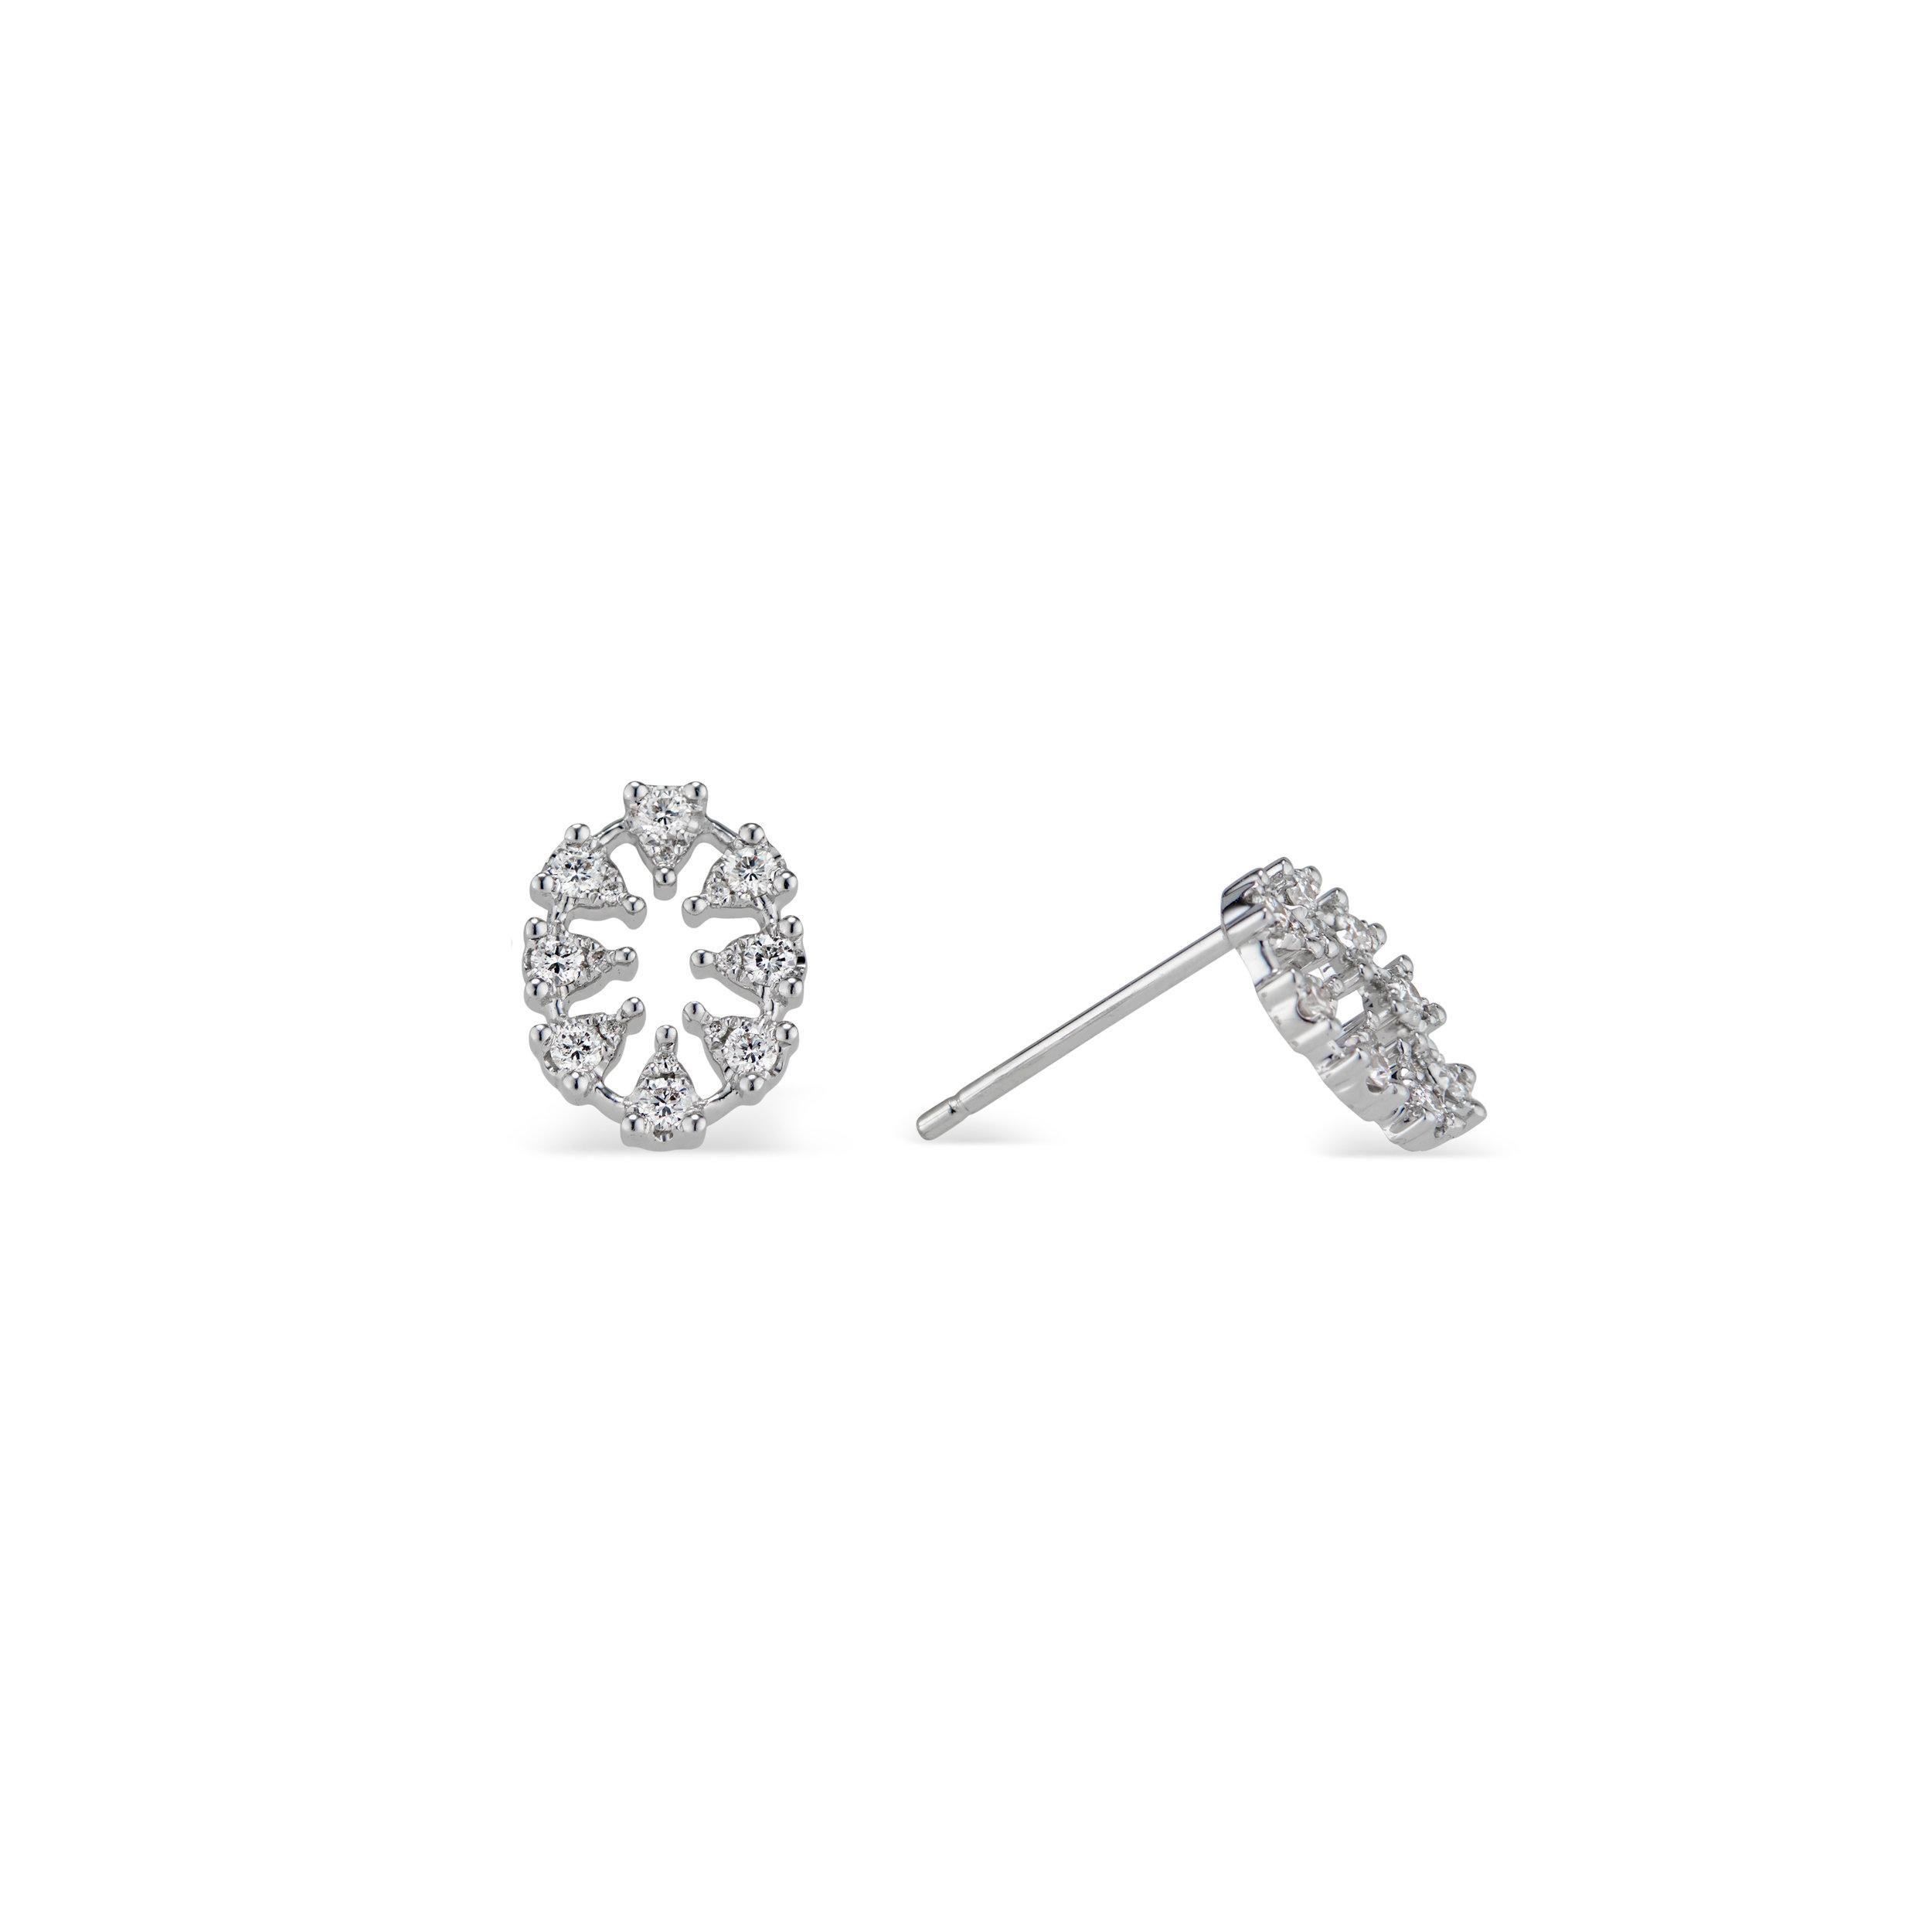 Triangles of brilliant white diamonds create an oval in this unique stud earring. French for “dream”, the Reve Oval Diamond Earrings lives up to its definition, creating an ethereal statement on the finger. In 18k white gold.

